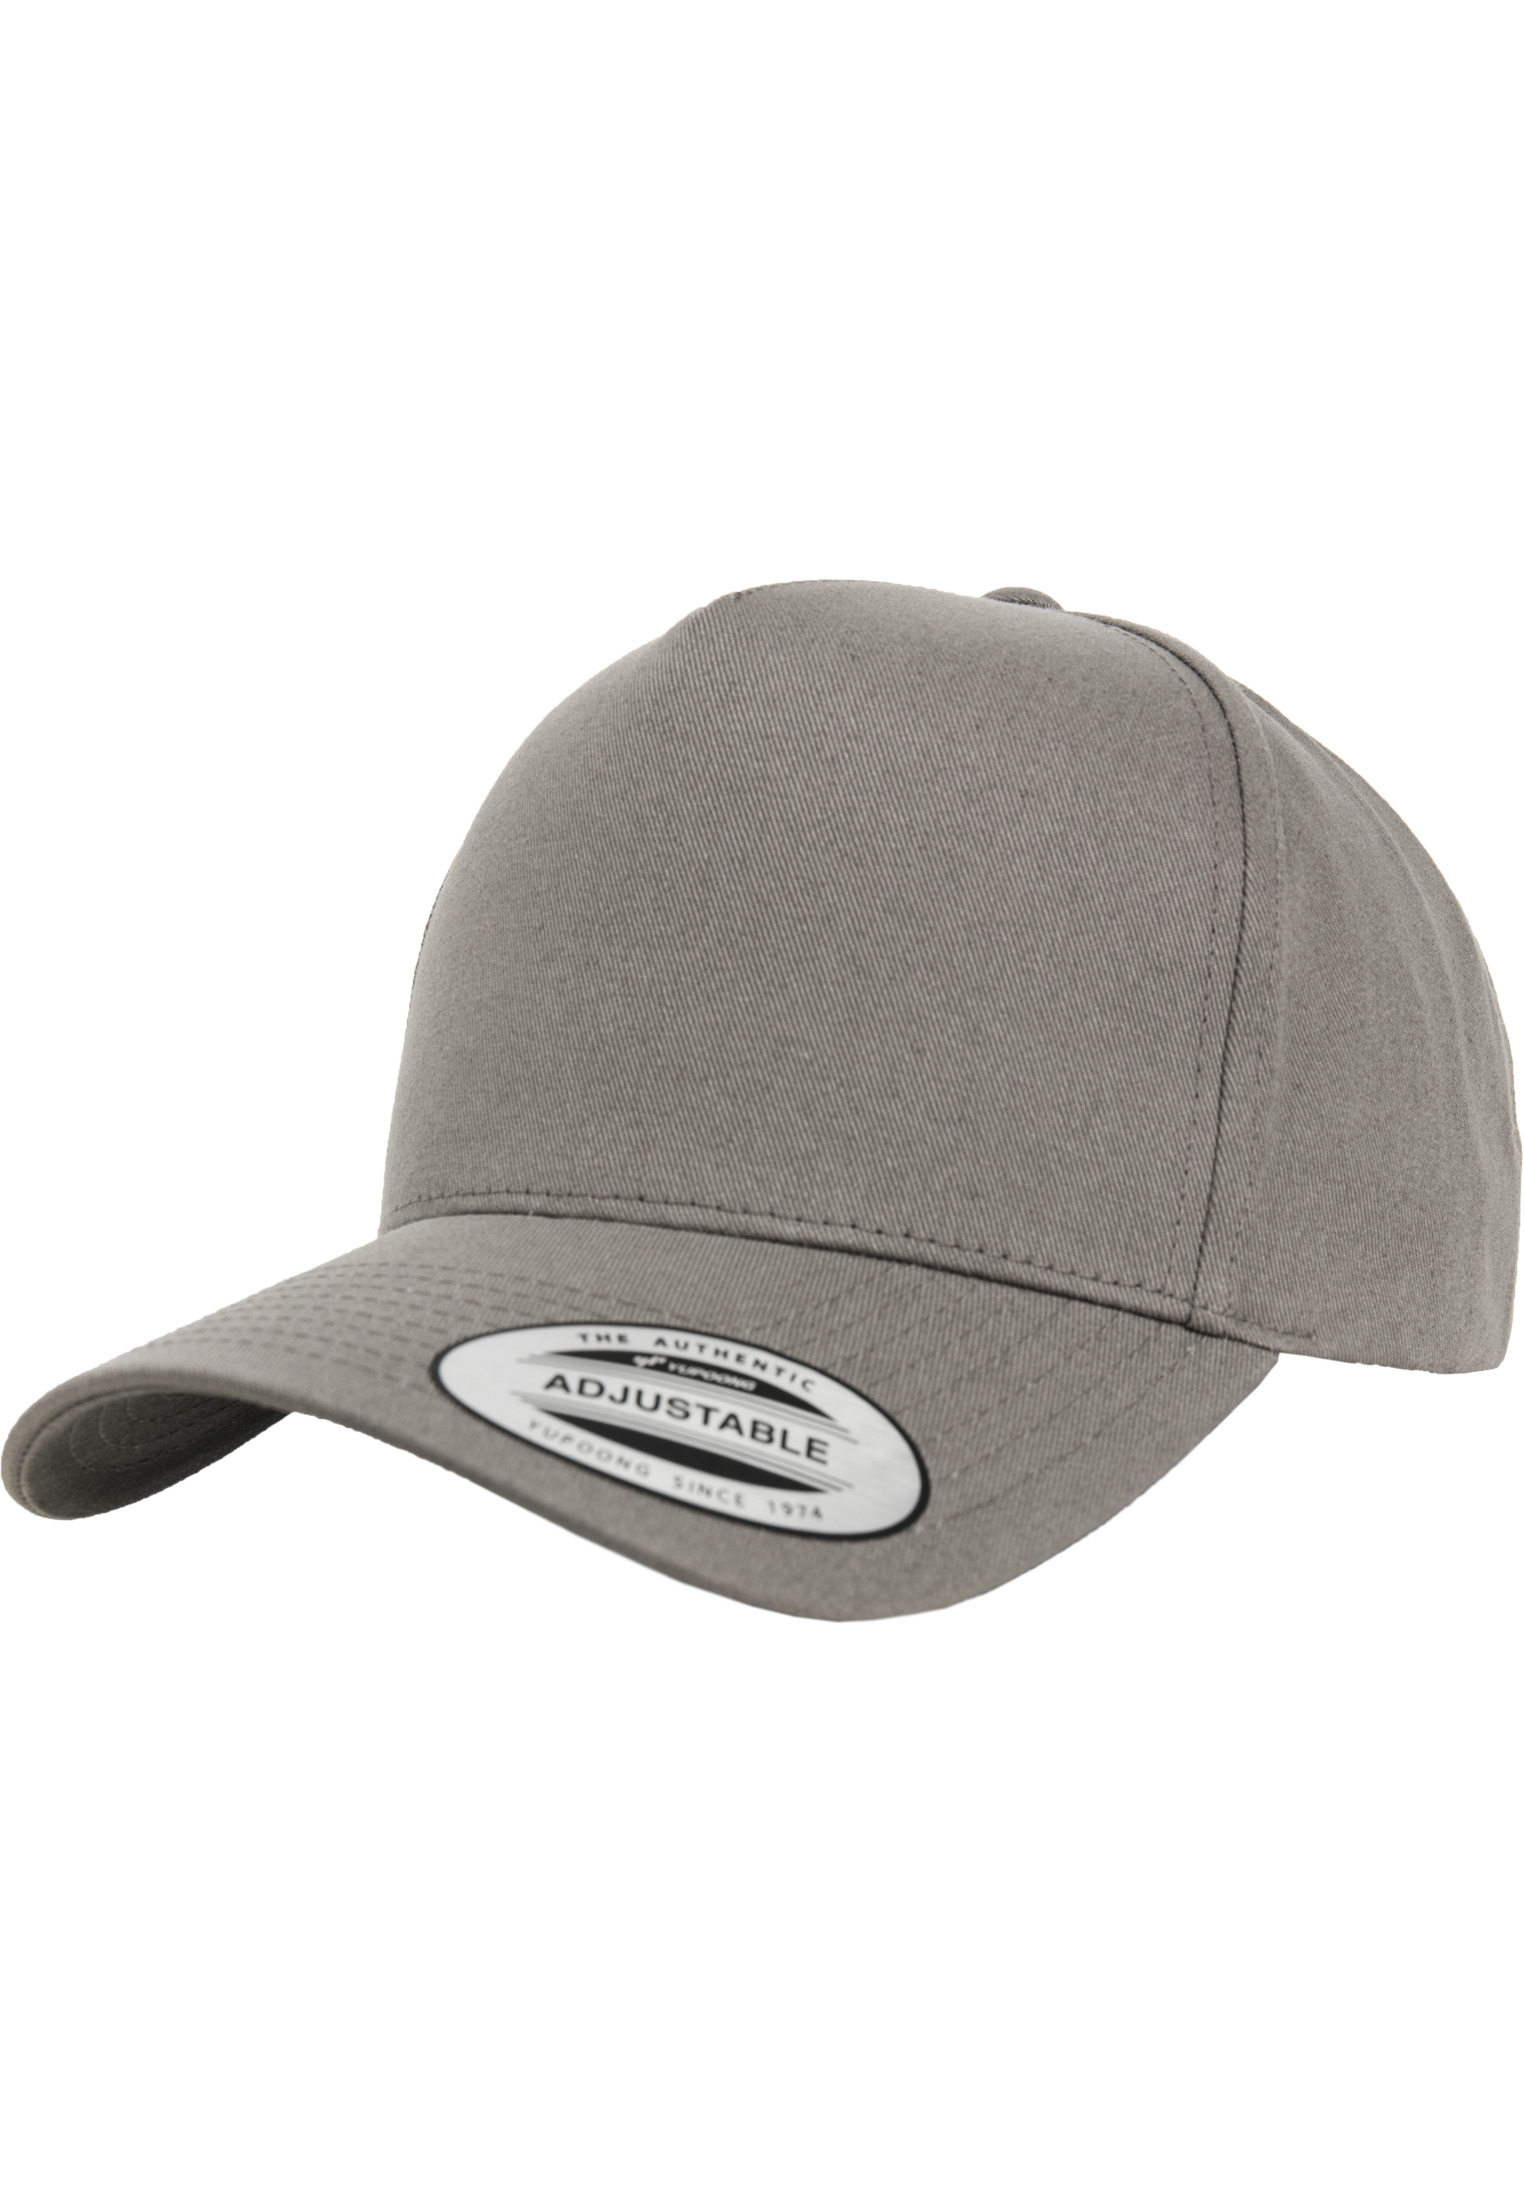 Snapback 5-Panel Curved Classic Snapback in Farbe grey